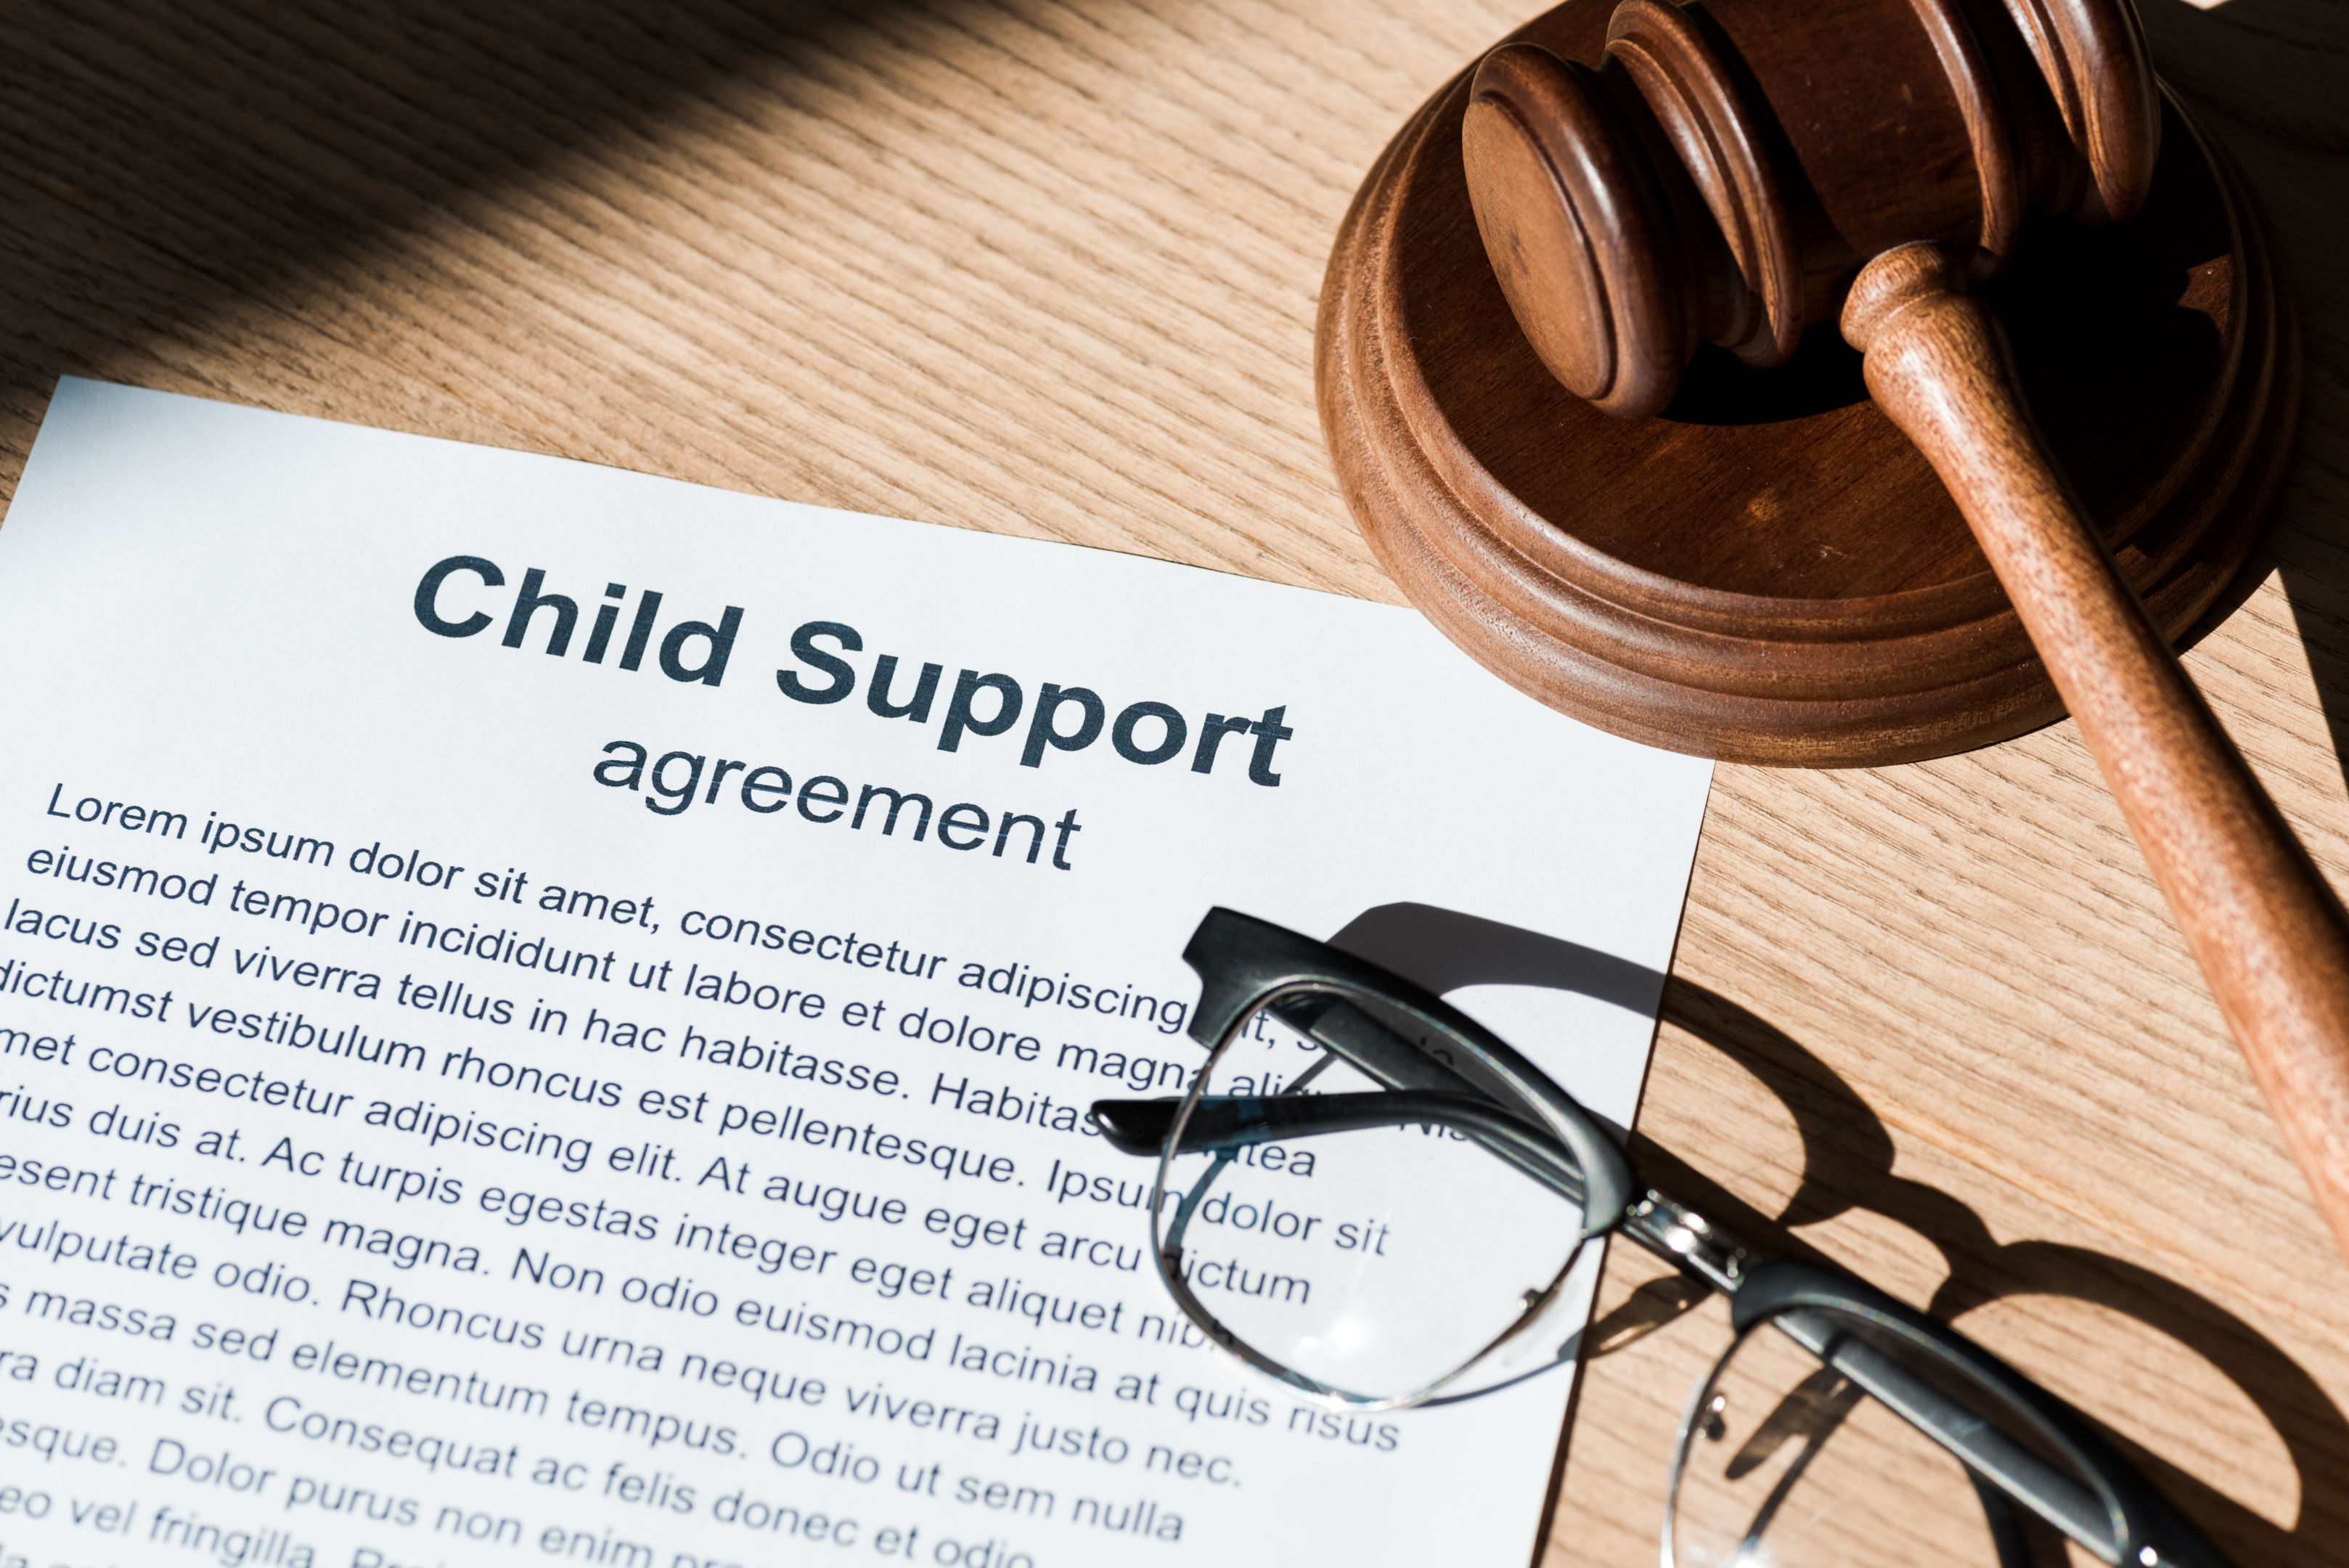 "A symbolic representation of the legal foundations underpinning child and spousal support agreements, emphasizing the serious and binding nature of these contracts."